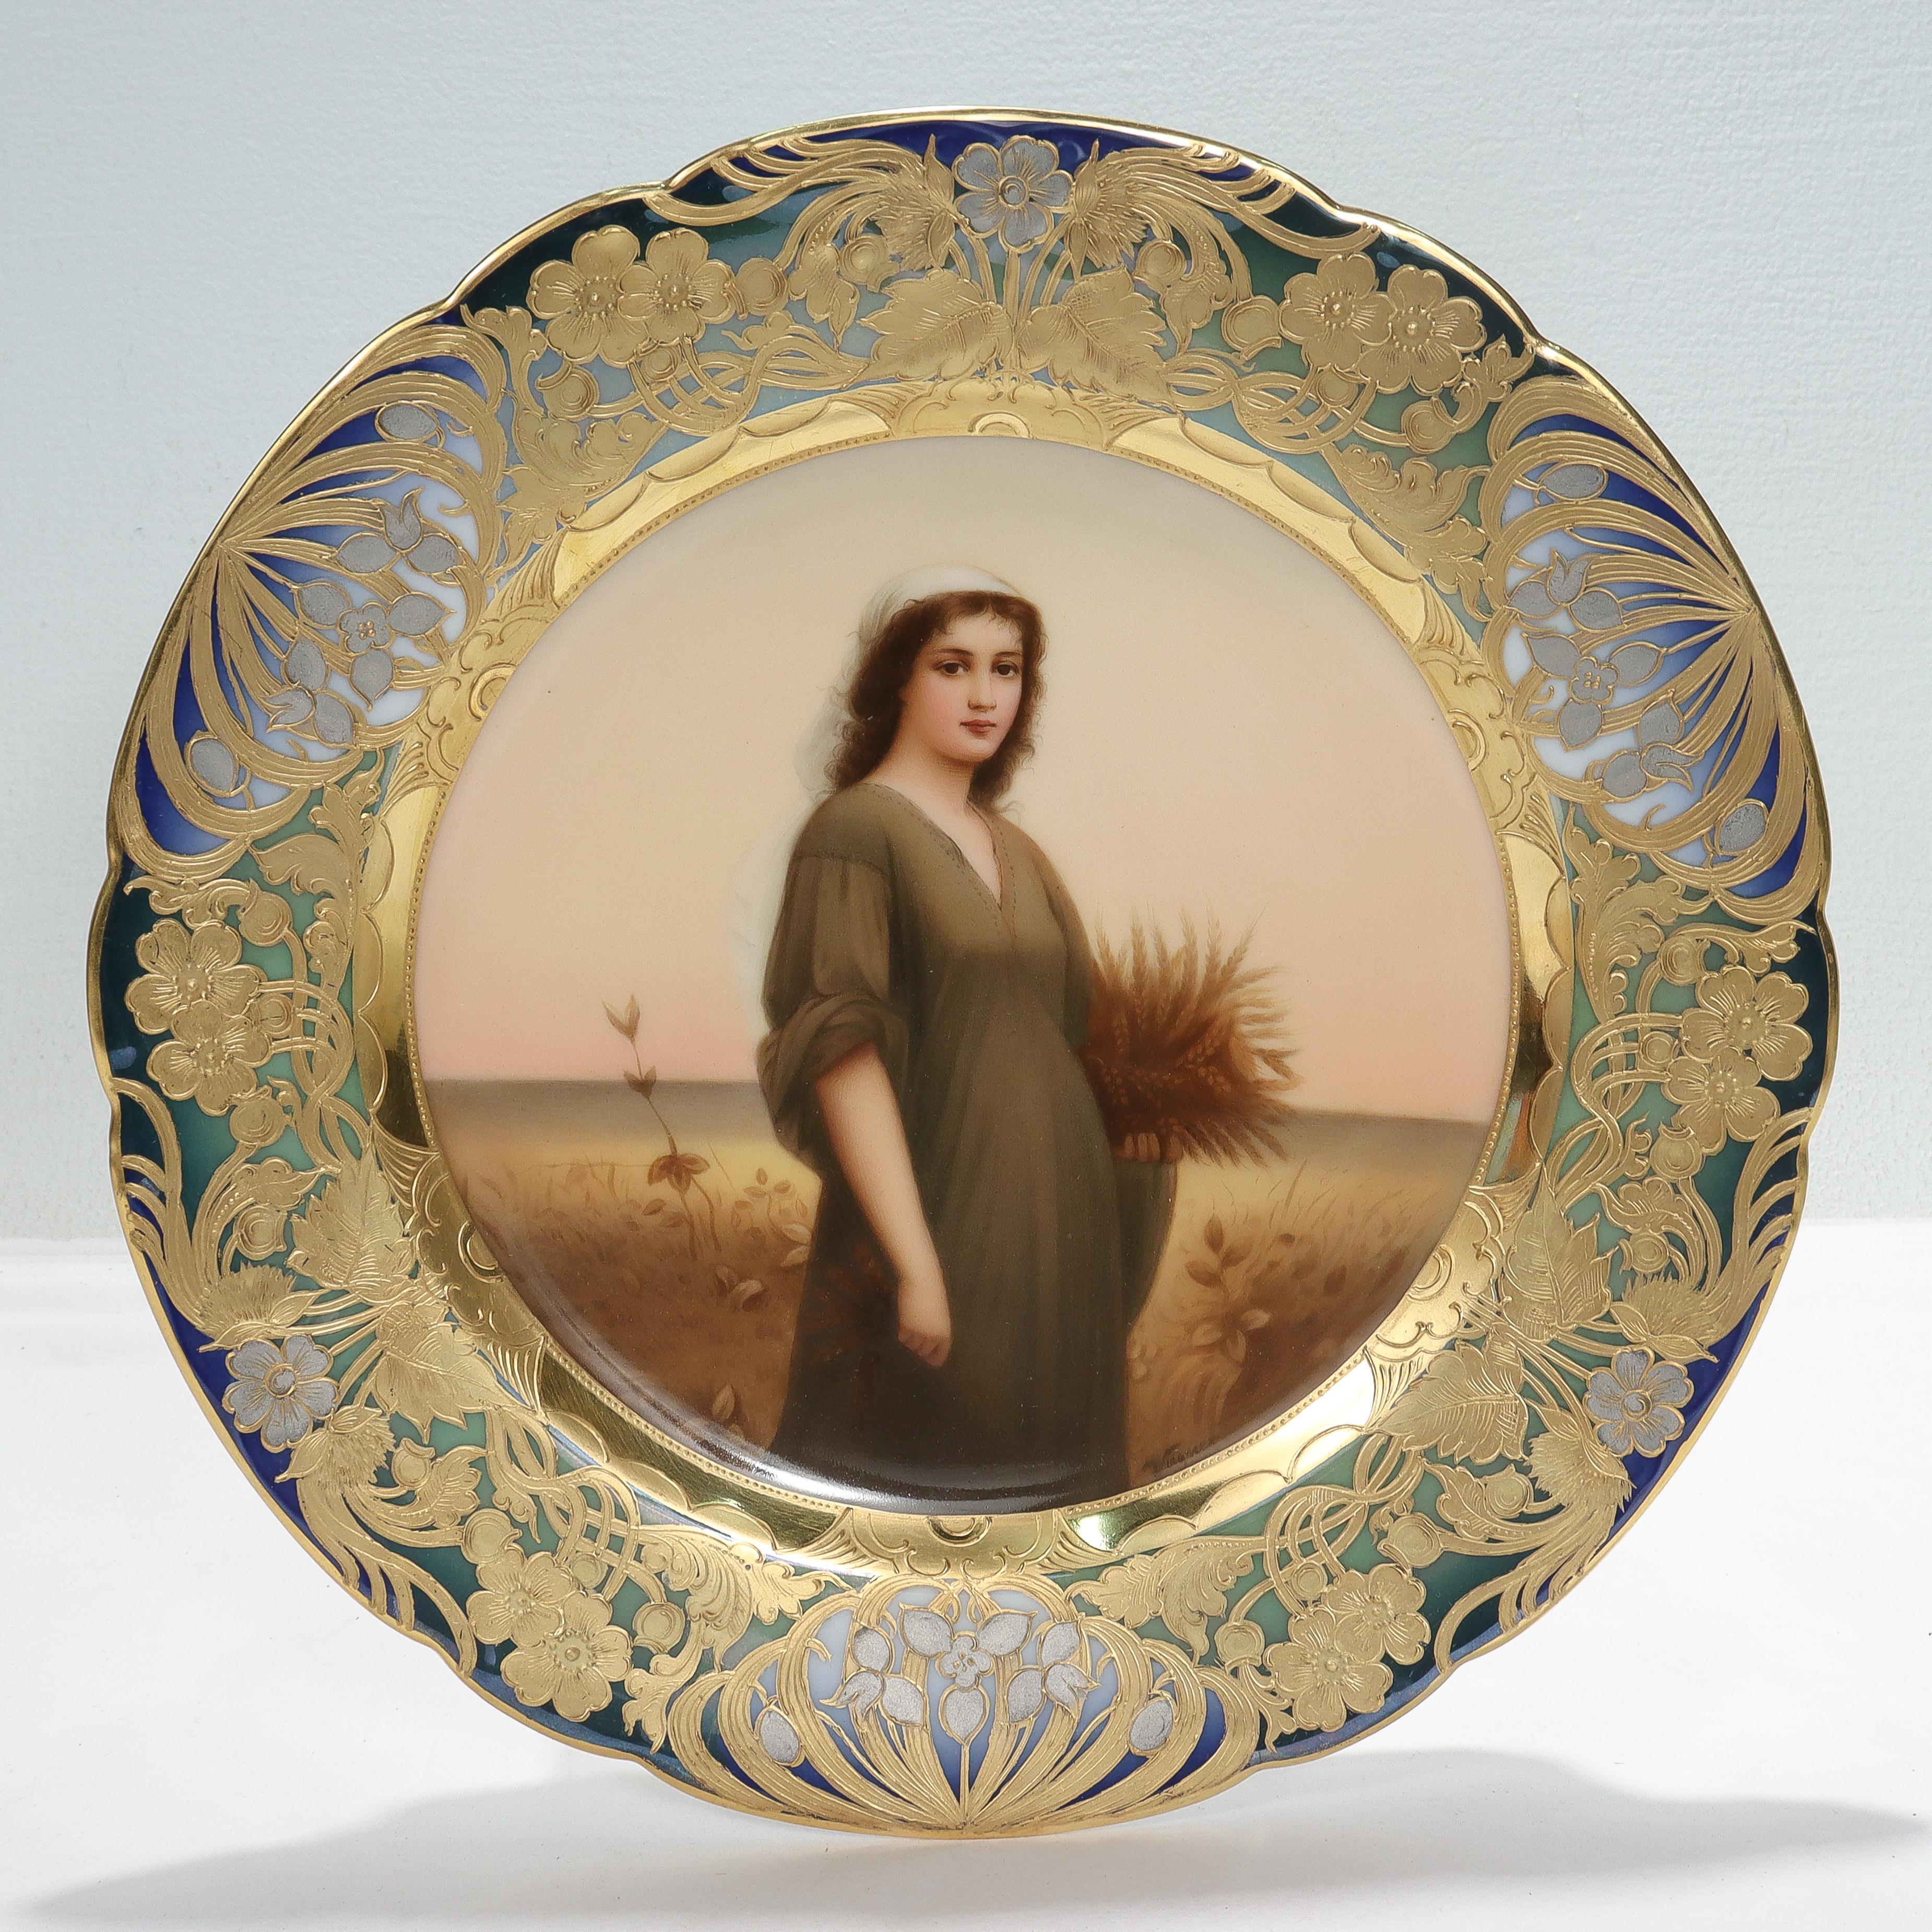 A fine, signed Art Nouveau porcelain cabinet plate.

By Royal Vienna.

Signed Wagner to the lower right.

With a hand painted depiction of Ruth to the center surrounded by a blue & green border richly decorated with platinum, raised gold, &